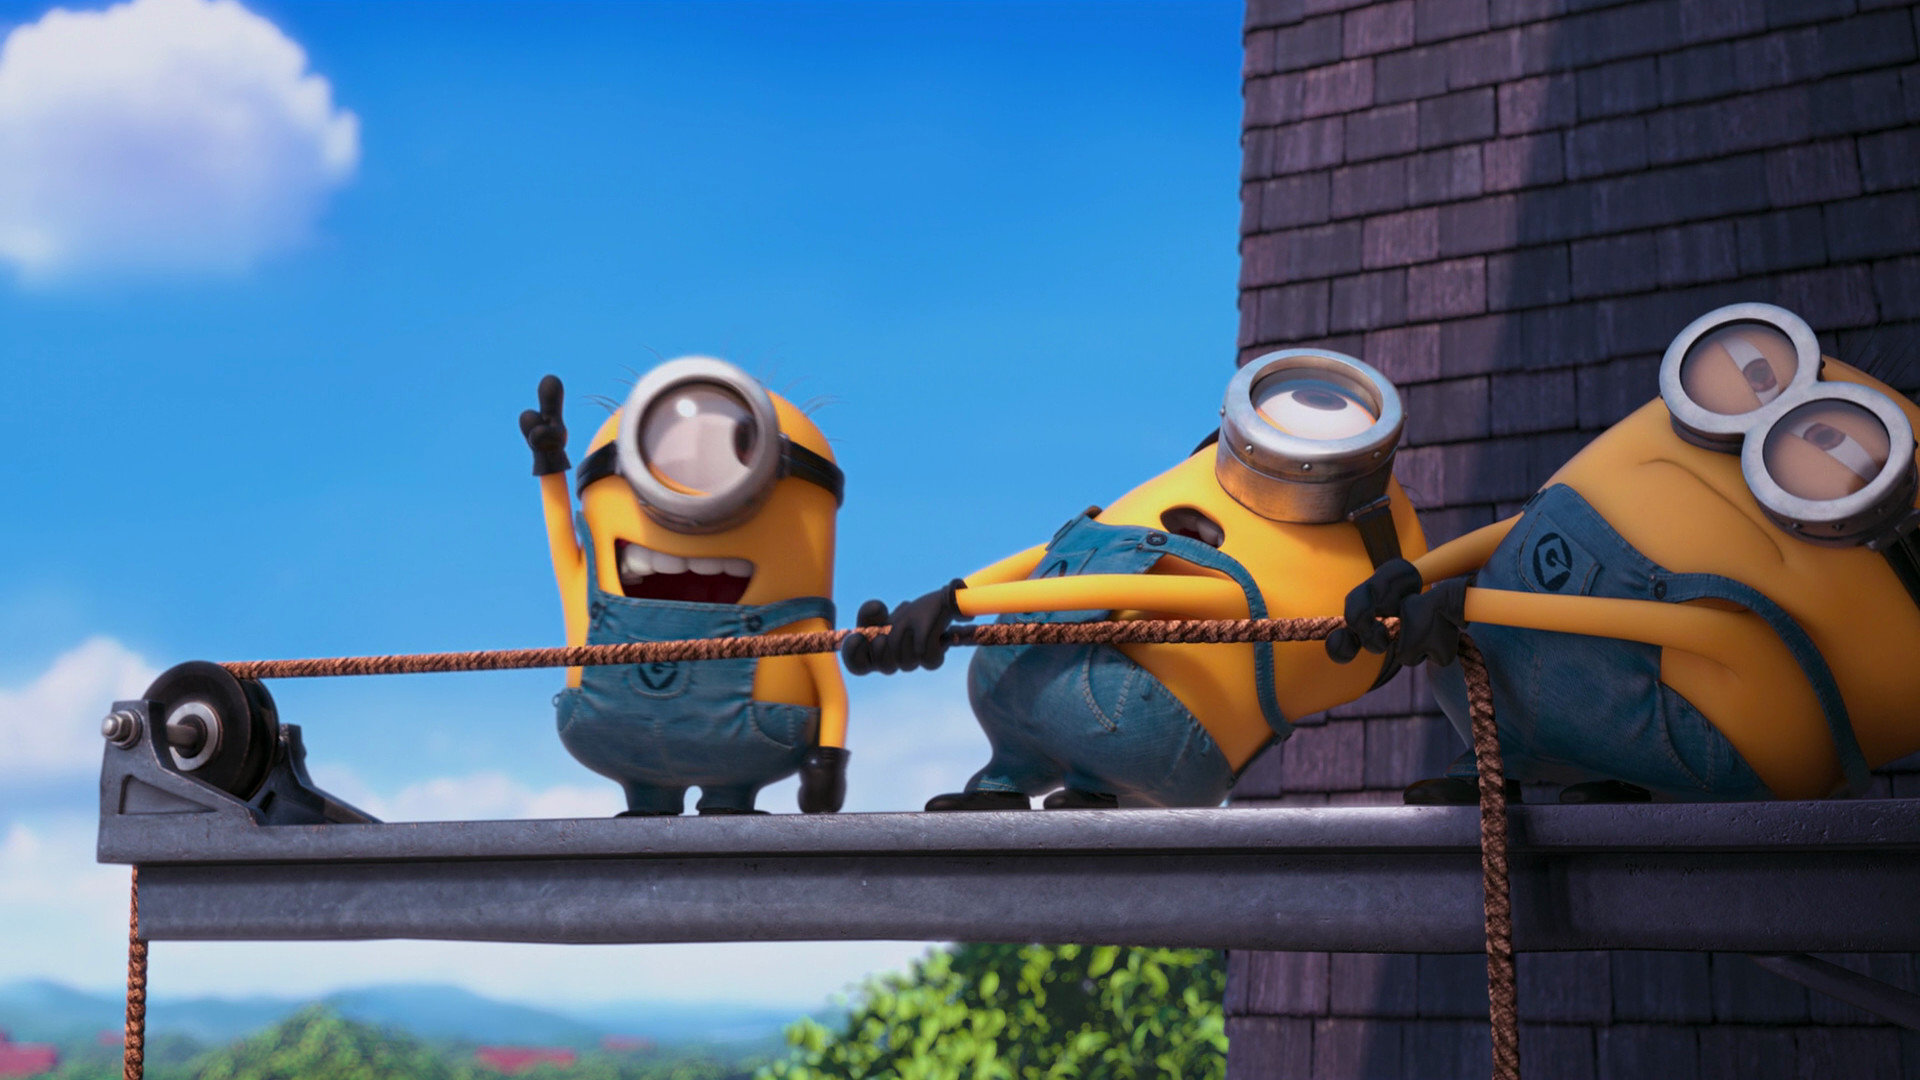 Download hd 1920x1080 Despicable Me 2 desktop wallpaper ID:281491 for free